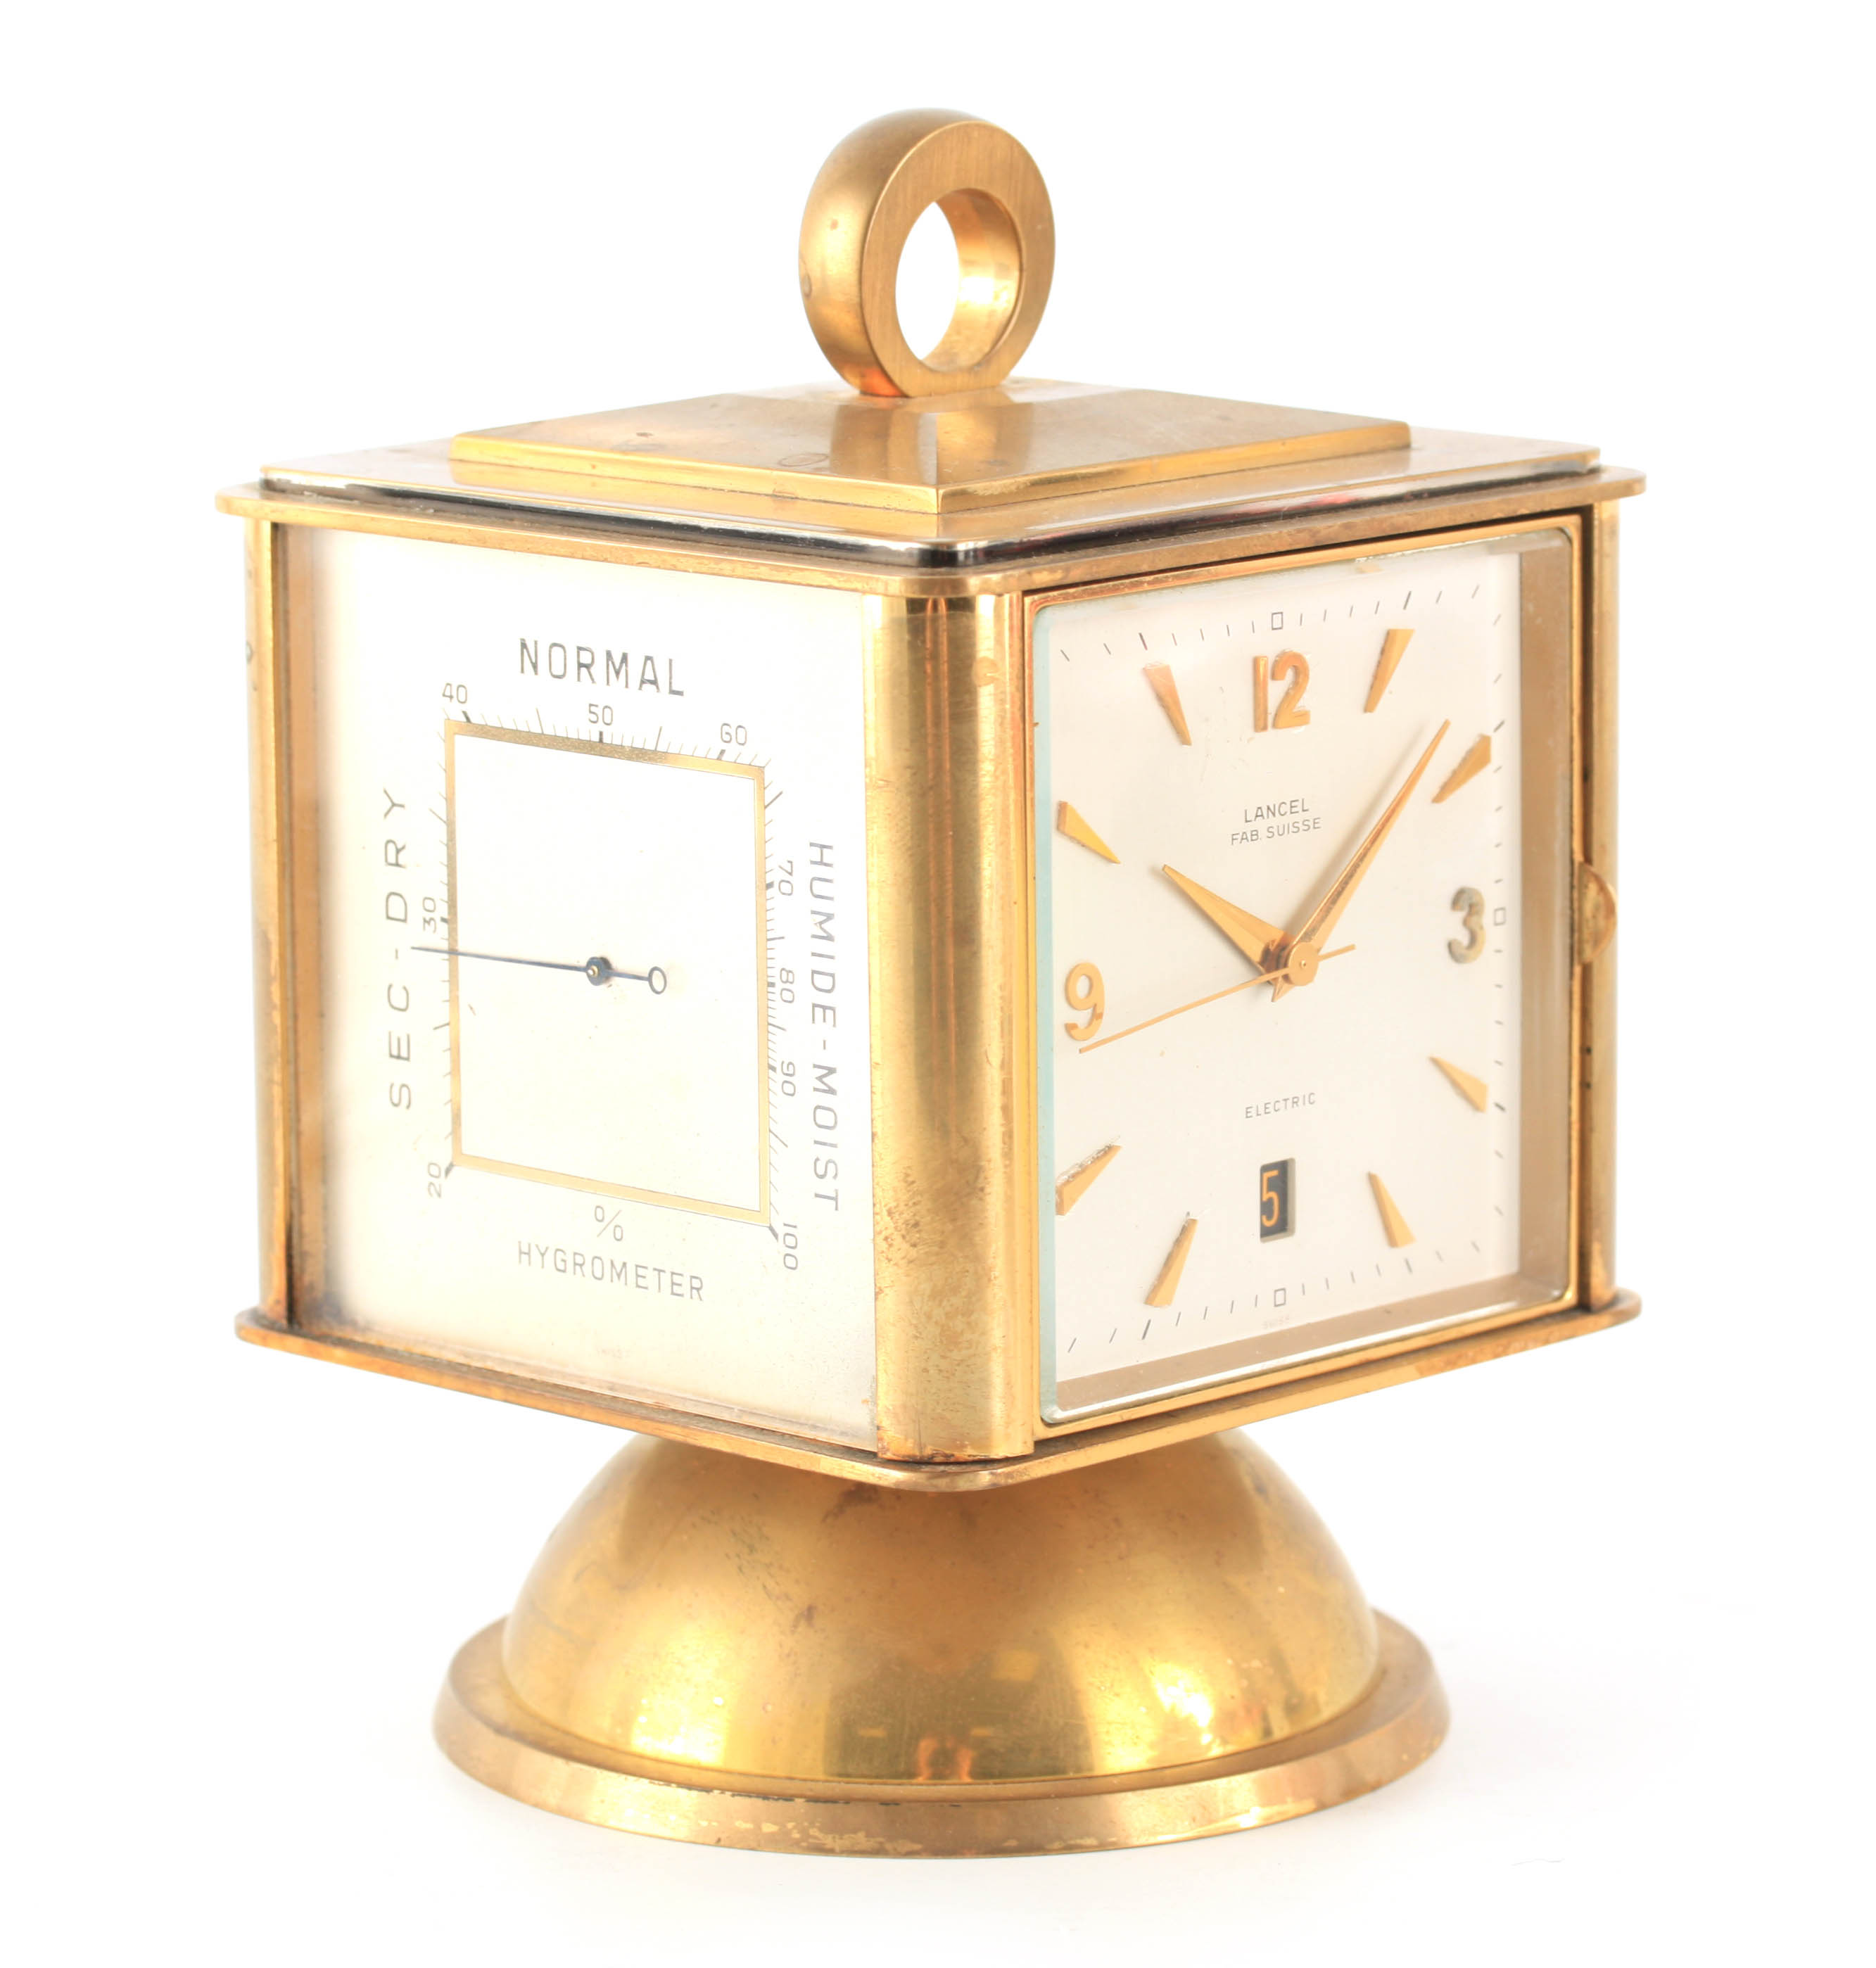 A LANCEL, 1950's SWISS GILT BRASS PORTABLE DESK CLOCK/WEATHER STATION the revolving cube body with